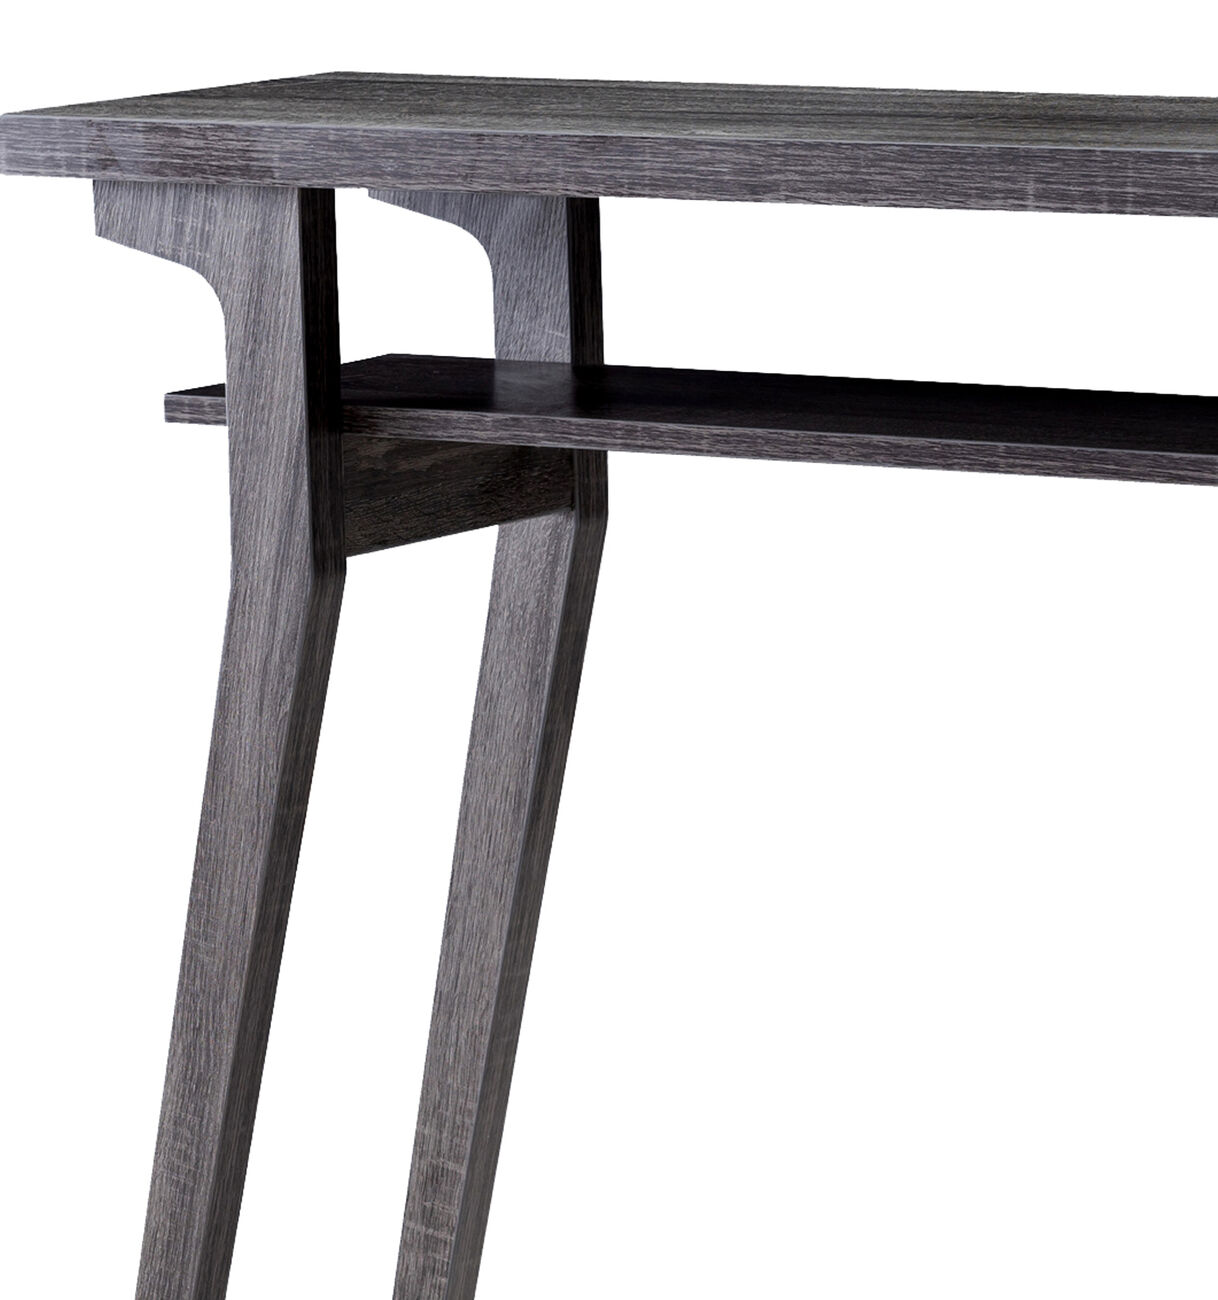 2 Tier Wooden Console Table with Slanted Leg Support, Distressed Gray